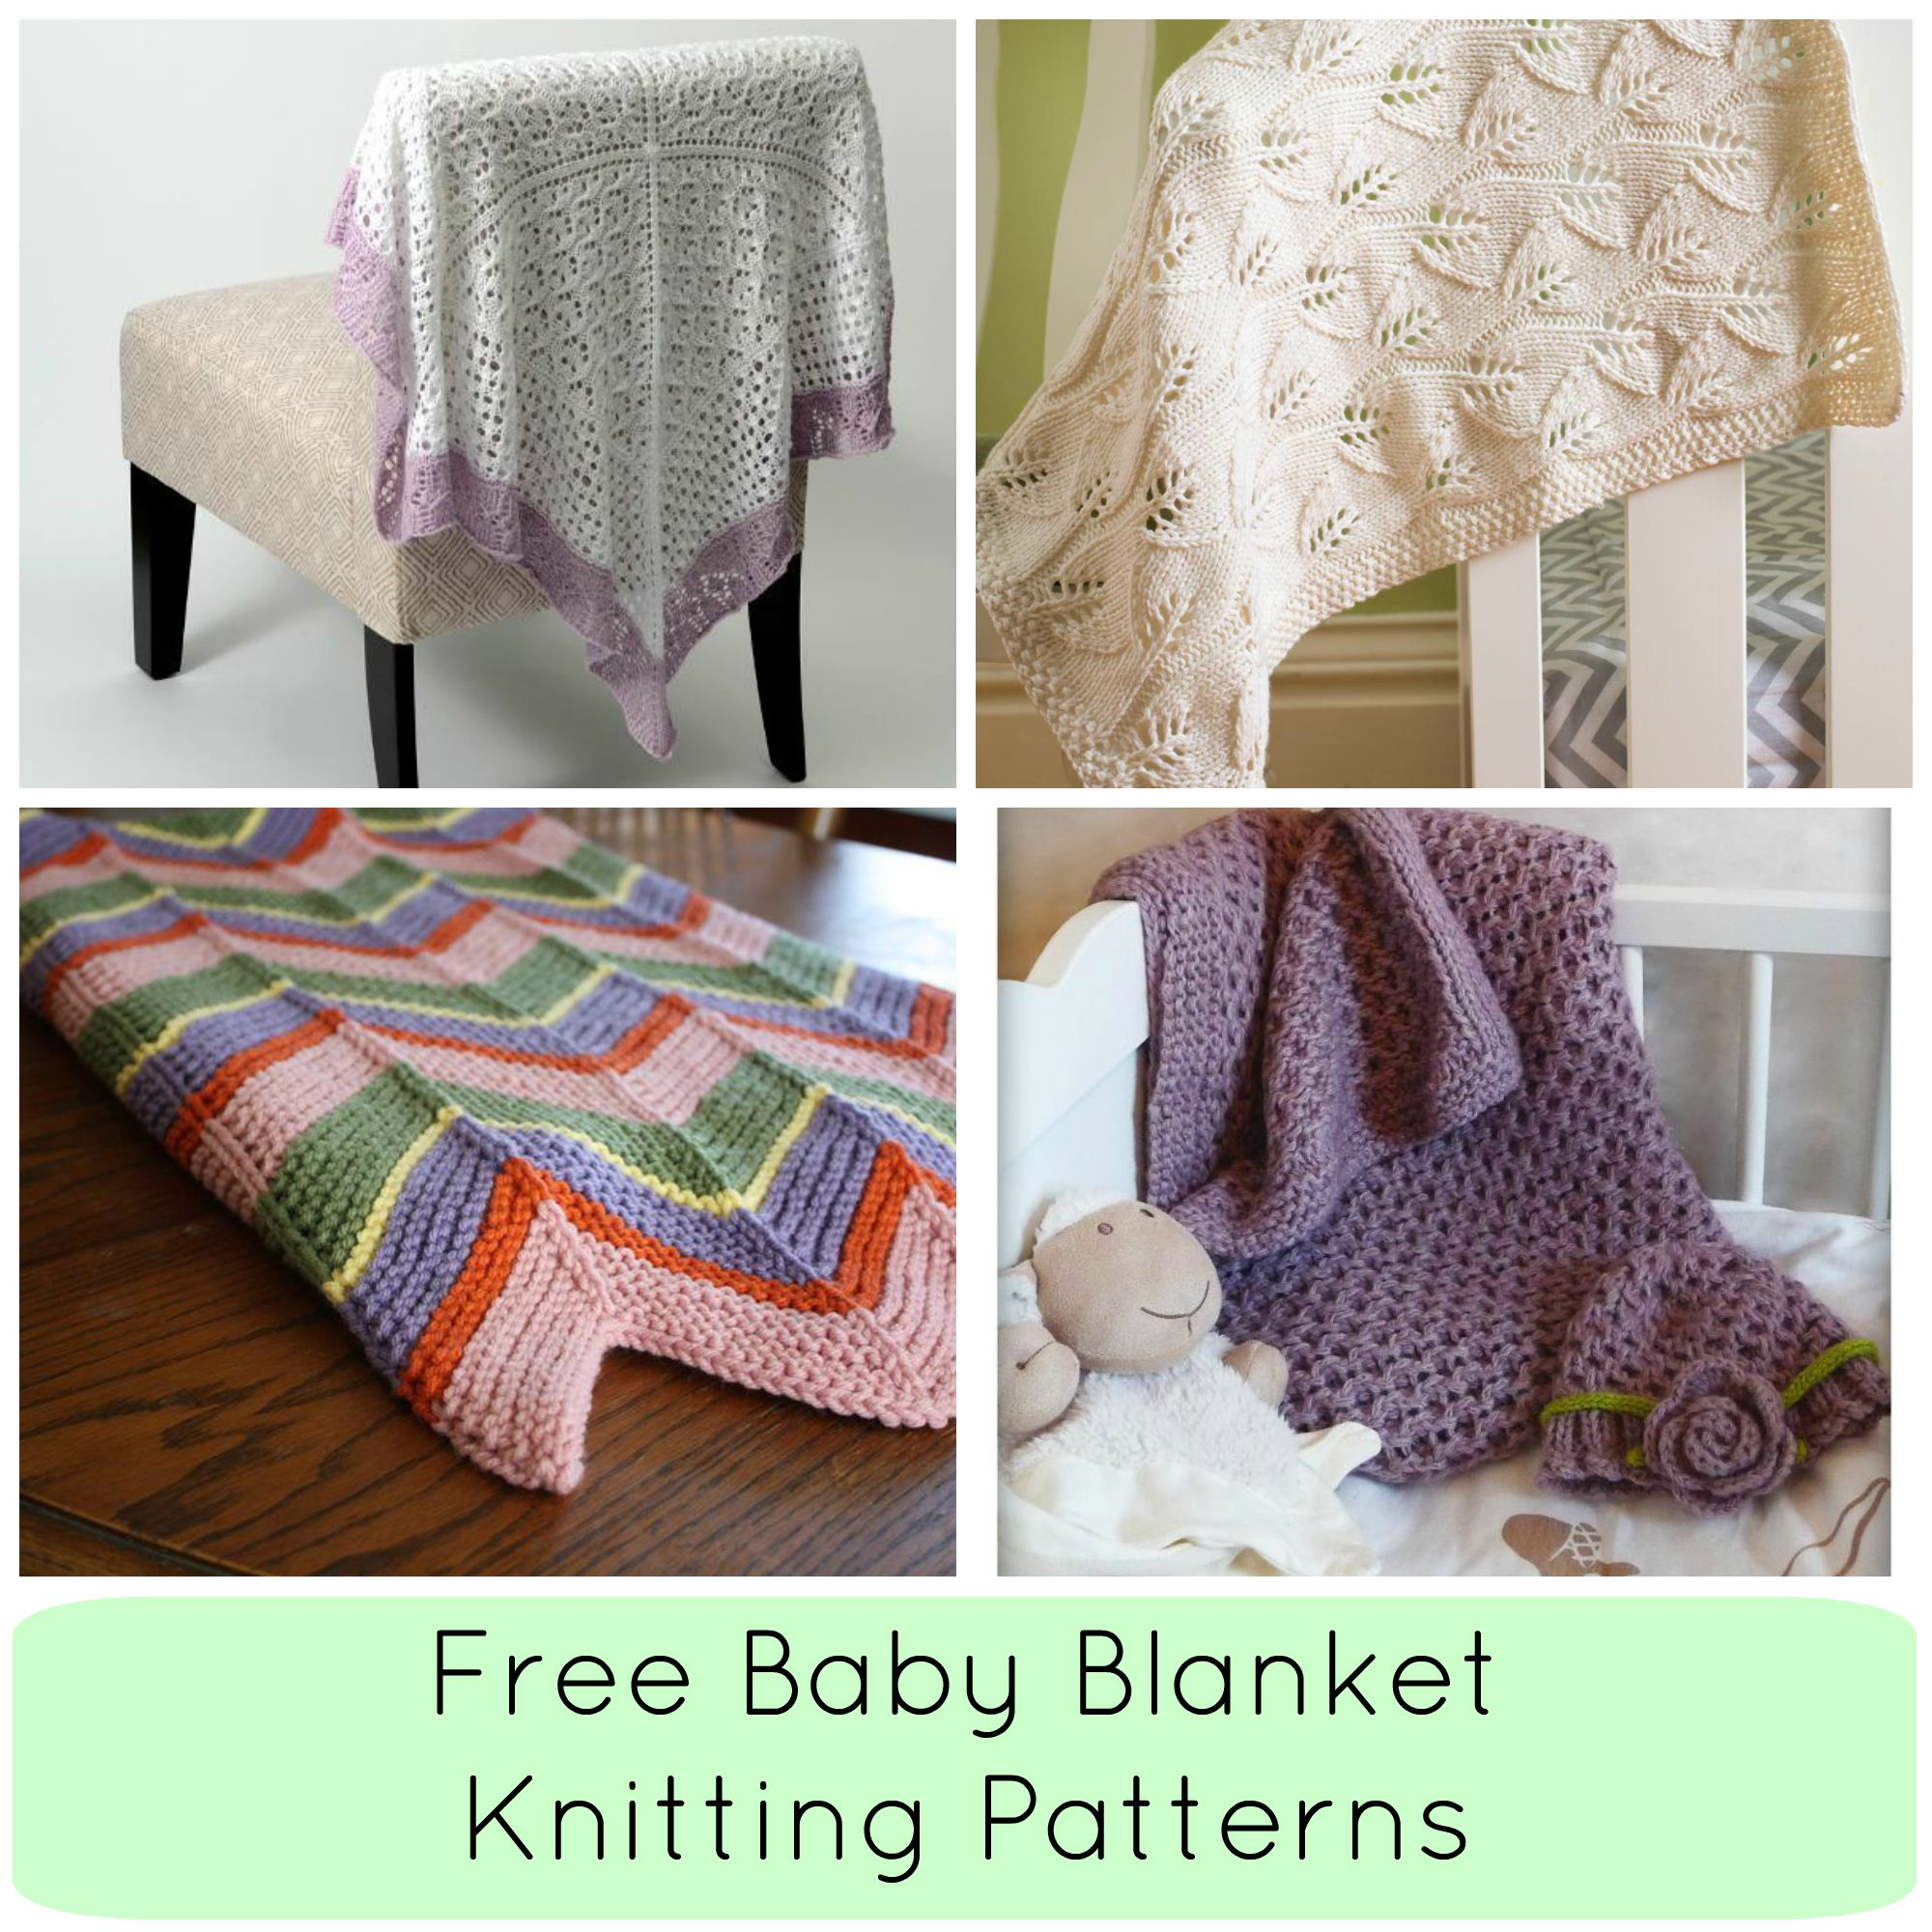 Knitting Patterns For Baby Blankets Easy 8 Free Ba Blanket Knitting Patterns Craftsy